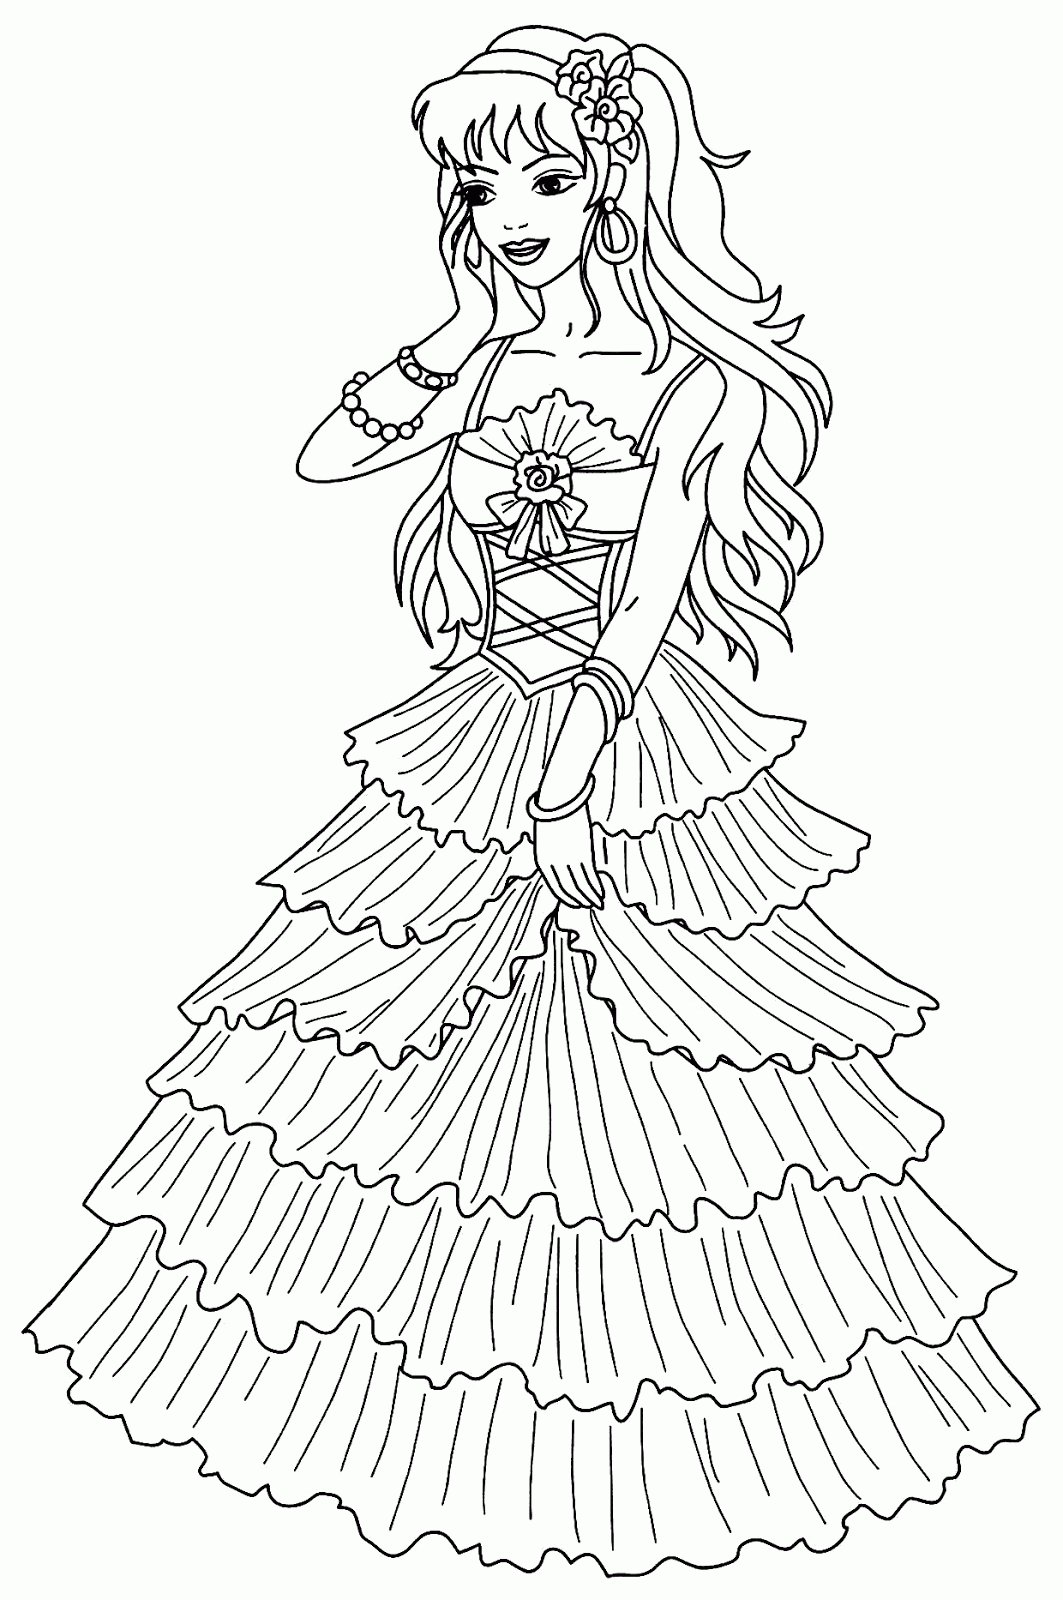 773 Cute Princess Coloring Pages with disney character